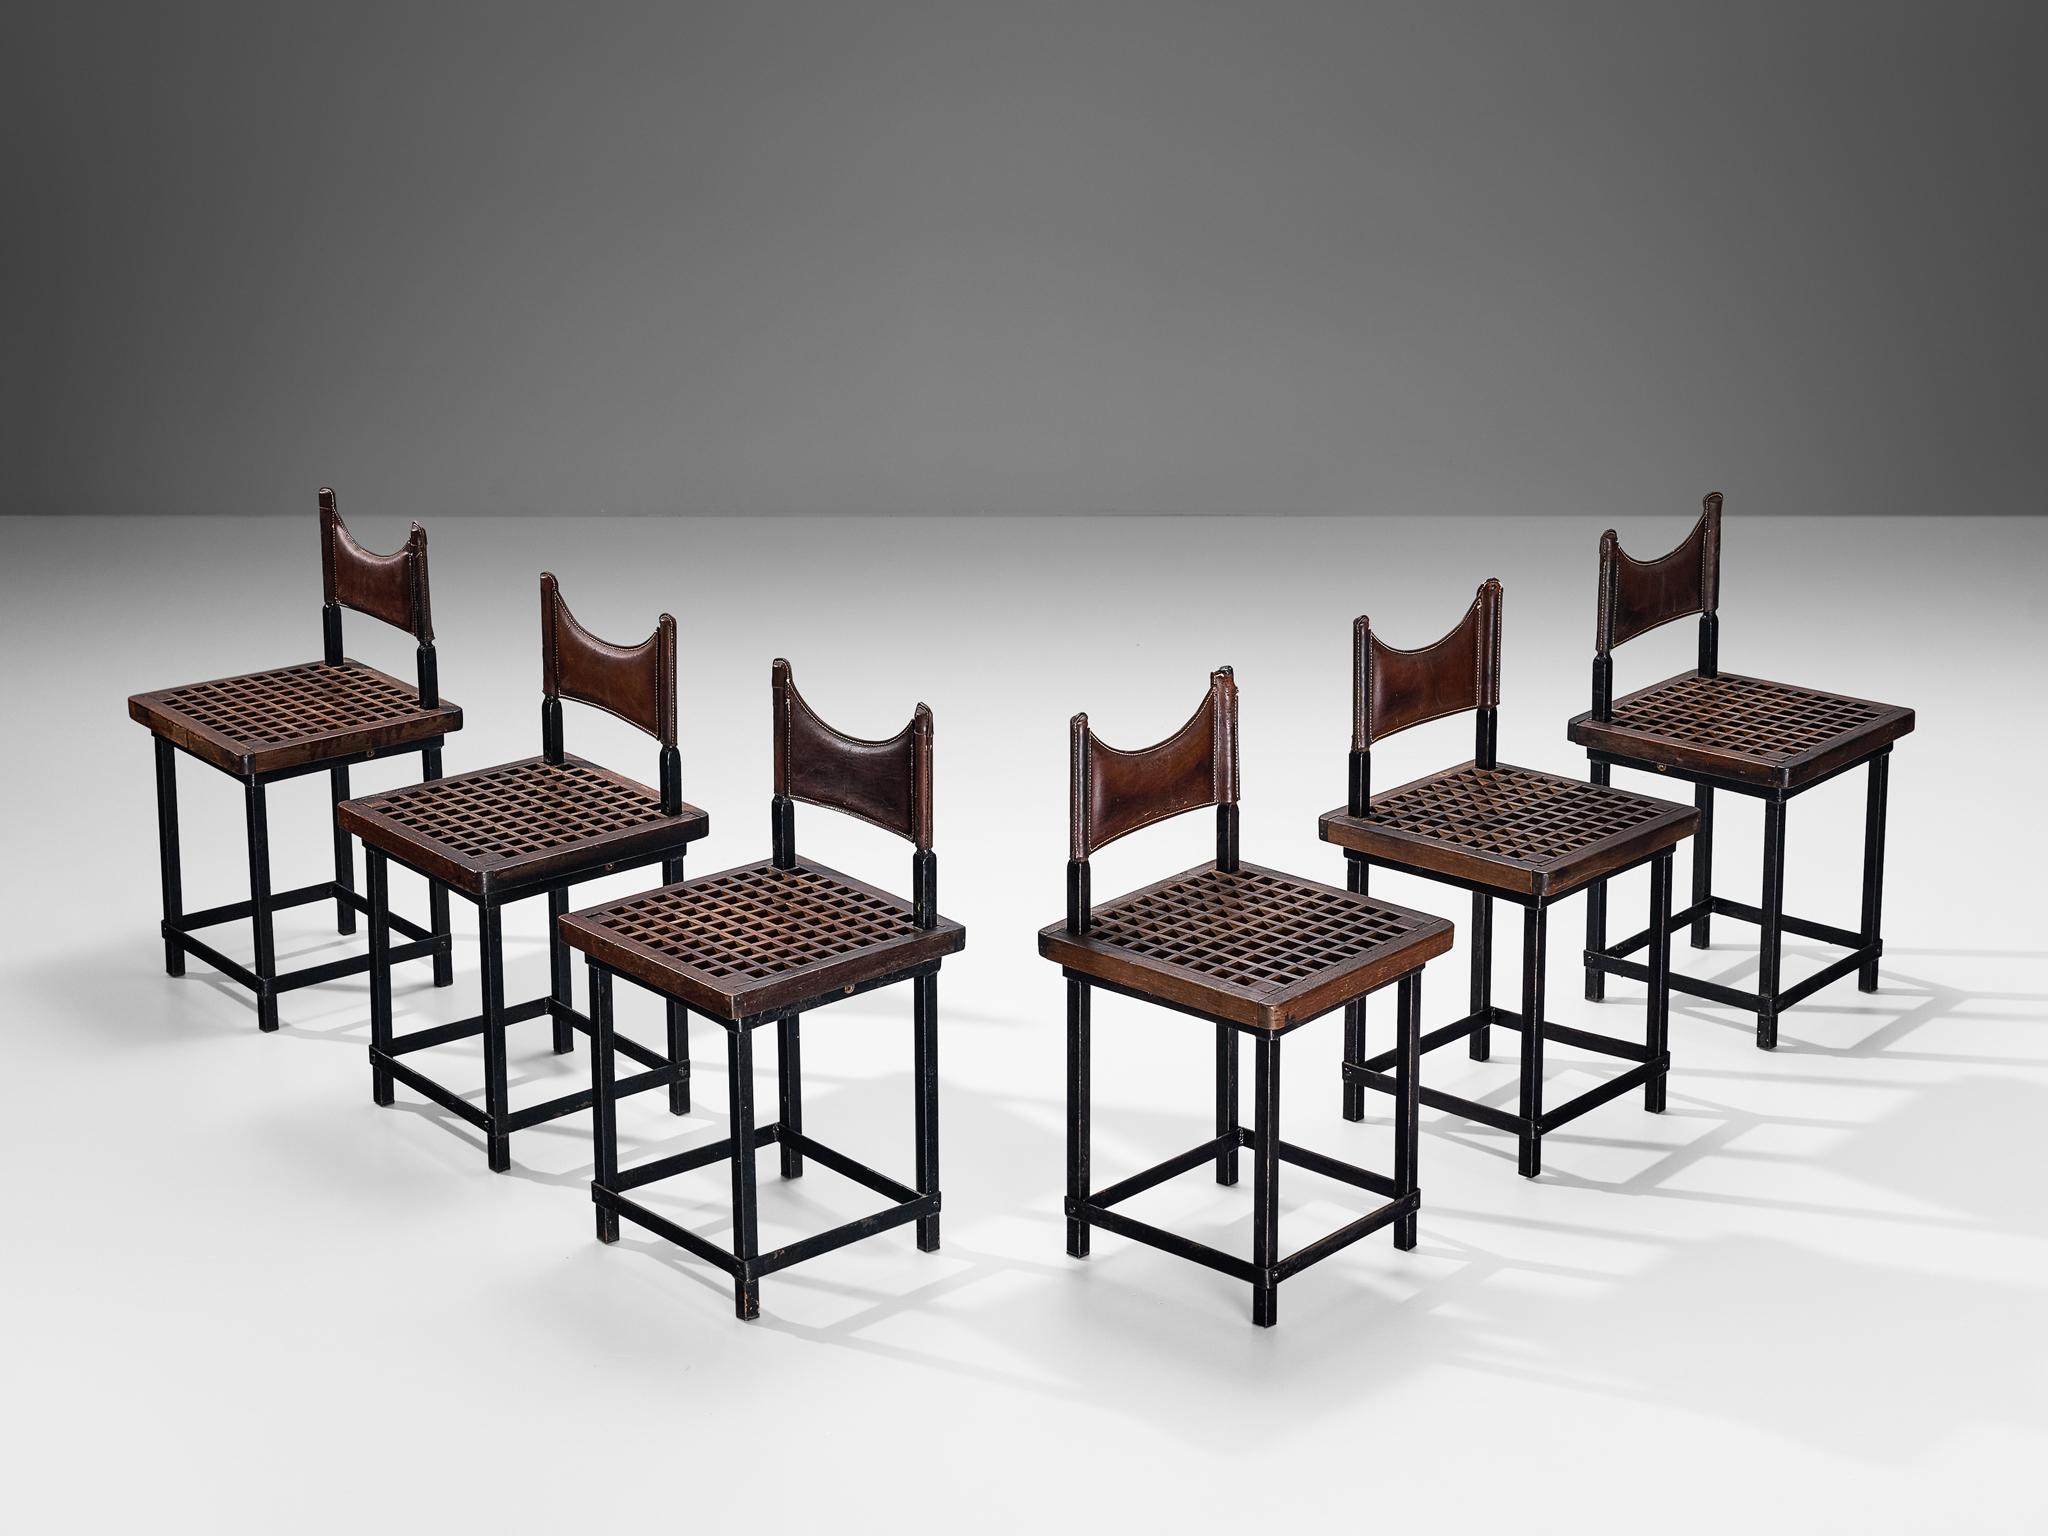 Set of six dining chairs, iron, leather, stained beech, Spain, 1950s.

These distinctive chairs of Spanish origin reflect the stylistic traits of Brutalism. This movement is an architectural style started from the mid-20th century, aiming for raw,